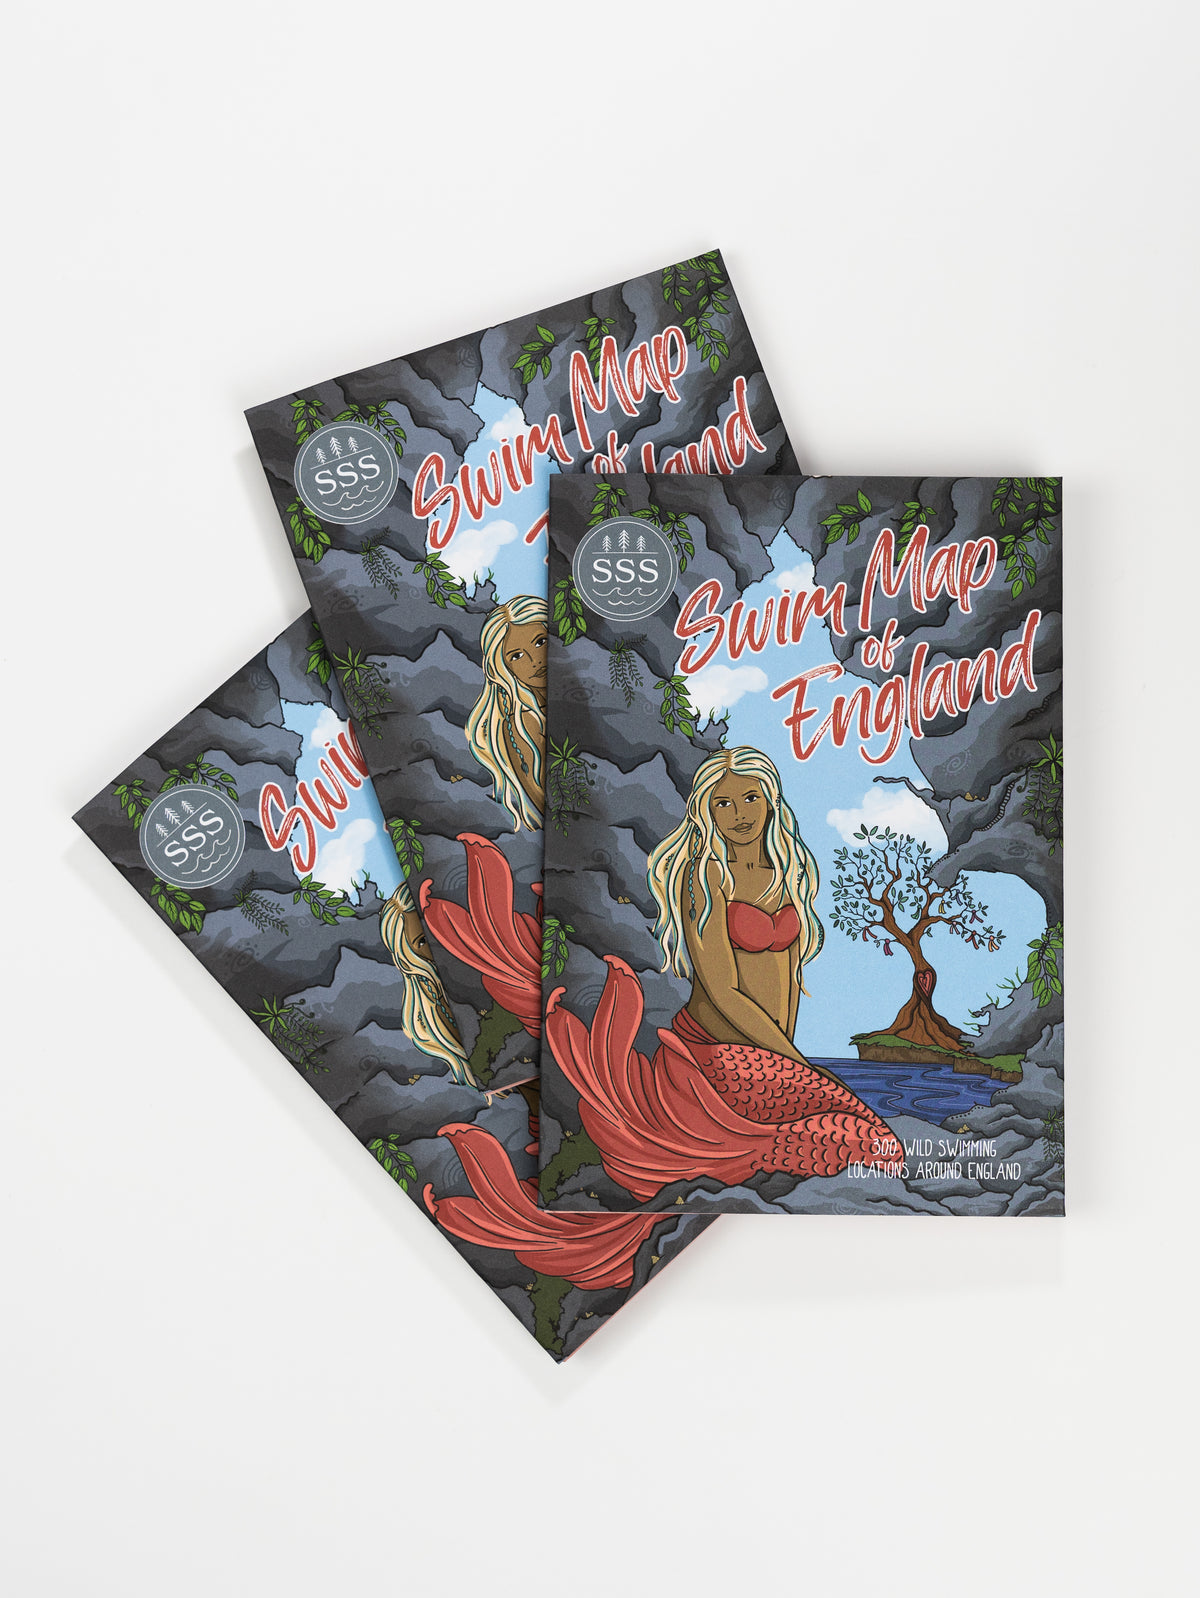 Three front covers of a swim map of England, showing a mermaid at the entrance to a cave. The mermaid has long blonde hair, brown skin colour and a red tail.